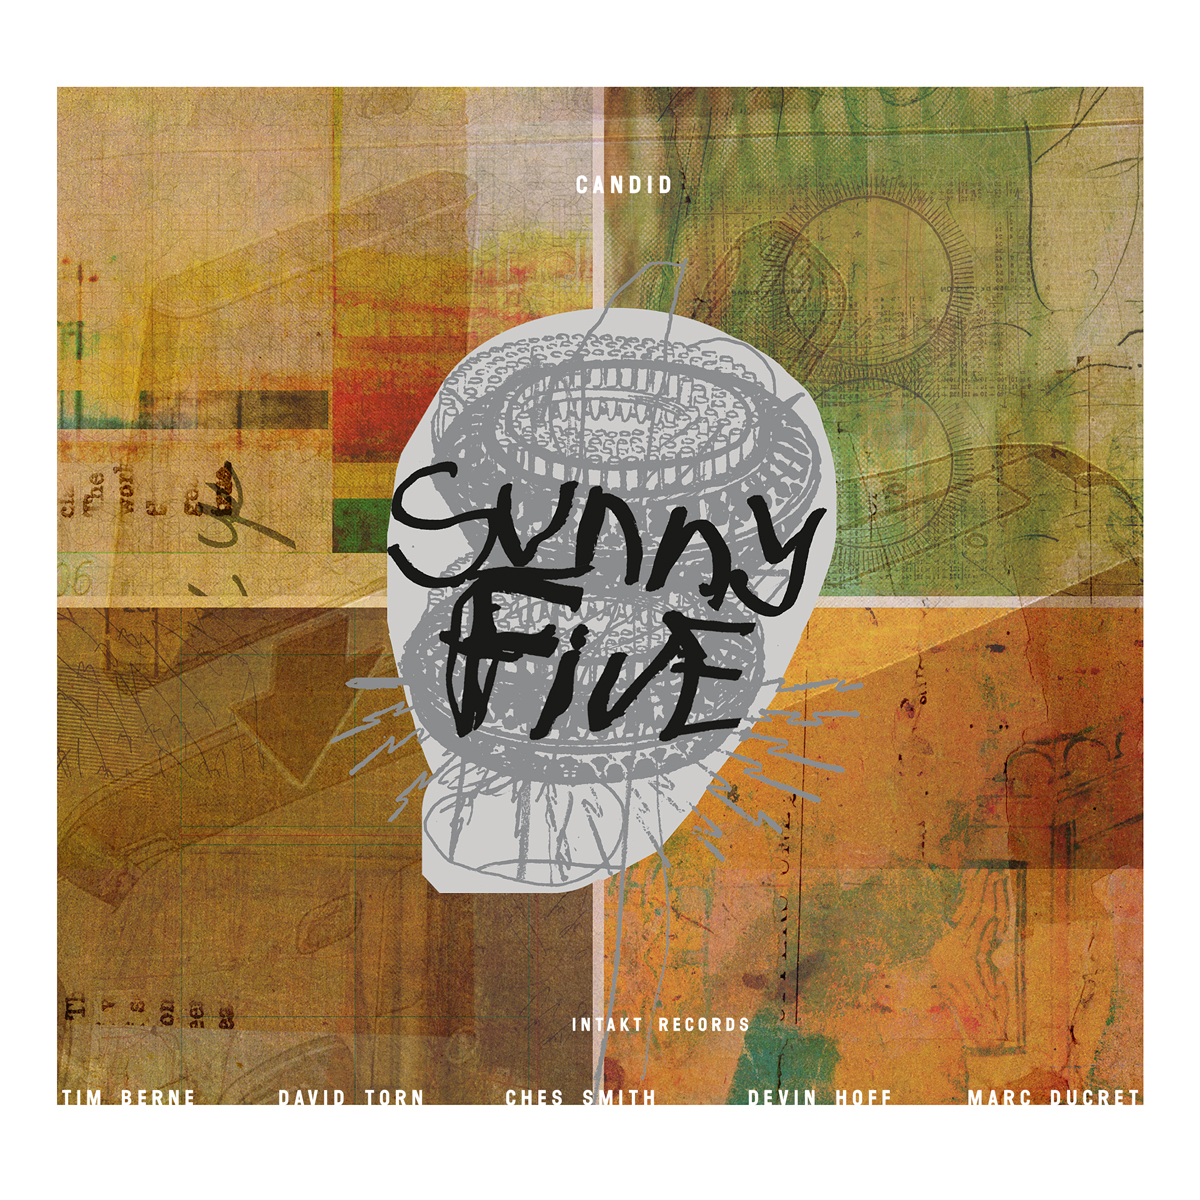 SUNNY FIVE. TIM BERNE – DAVID TORN – CHES SMITH – DEVIN HOFF – MARC DUCRET. CANDID. cover front intakt records